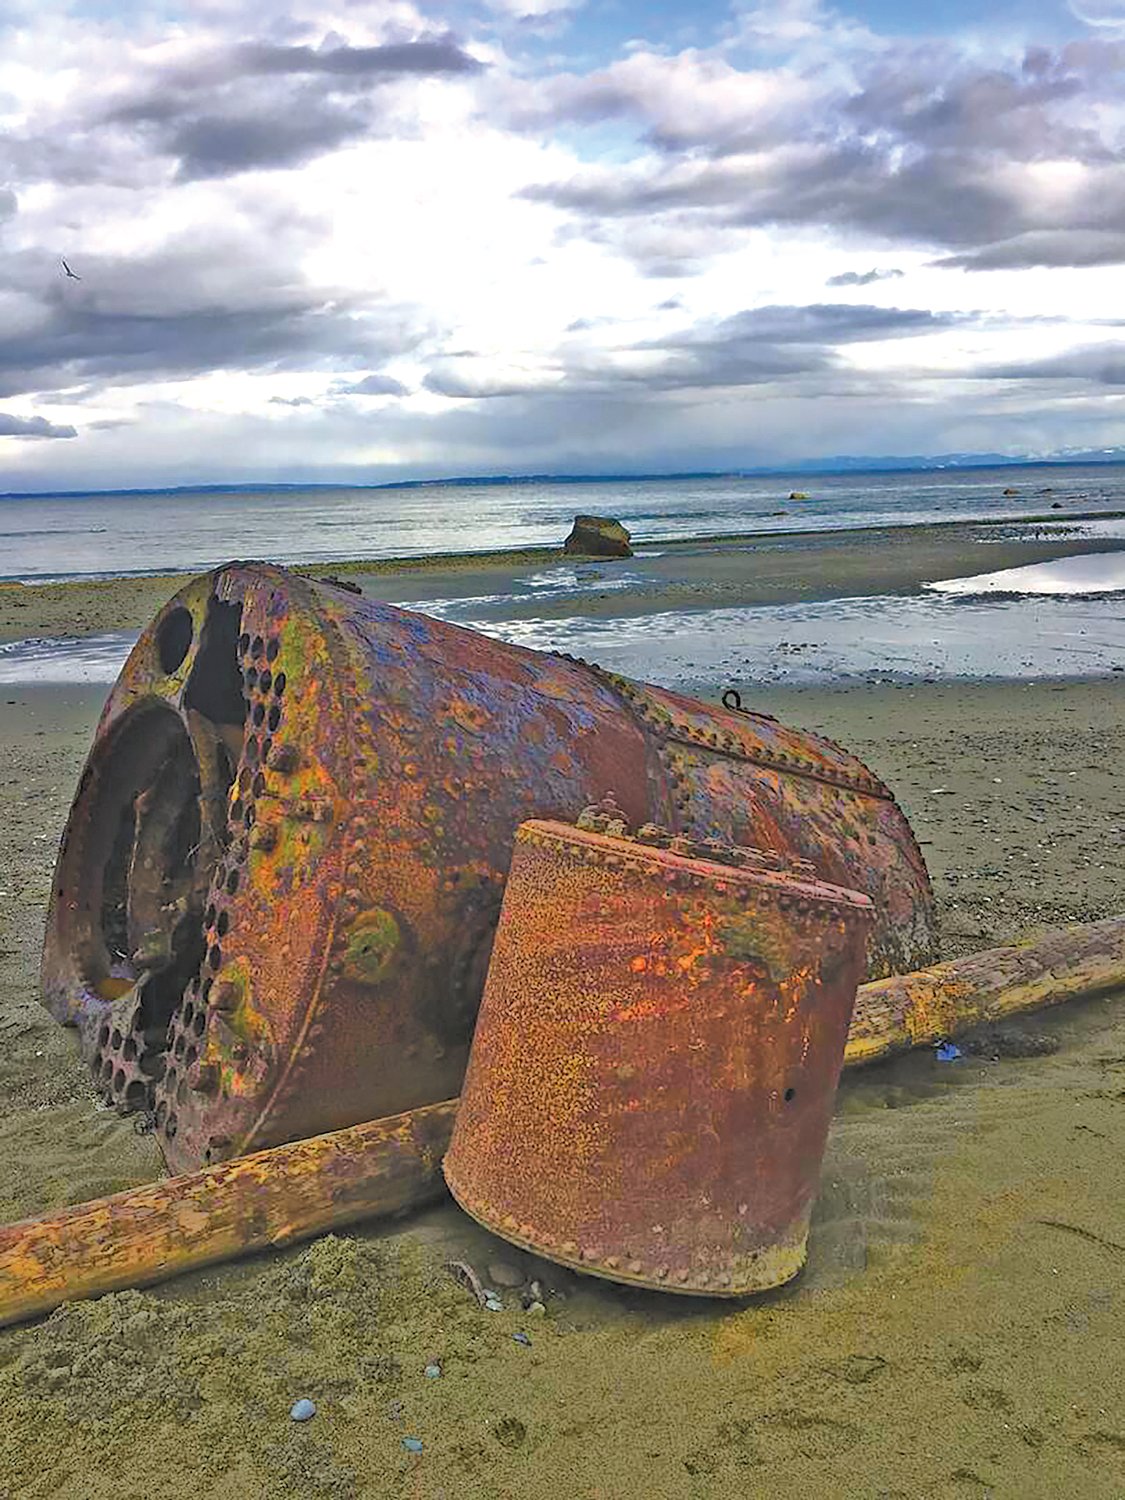 Goodfellow’s big boiler still lays on the beach where he left it.